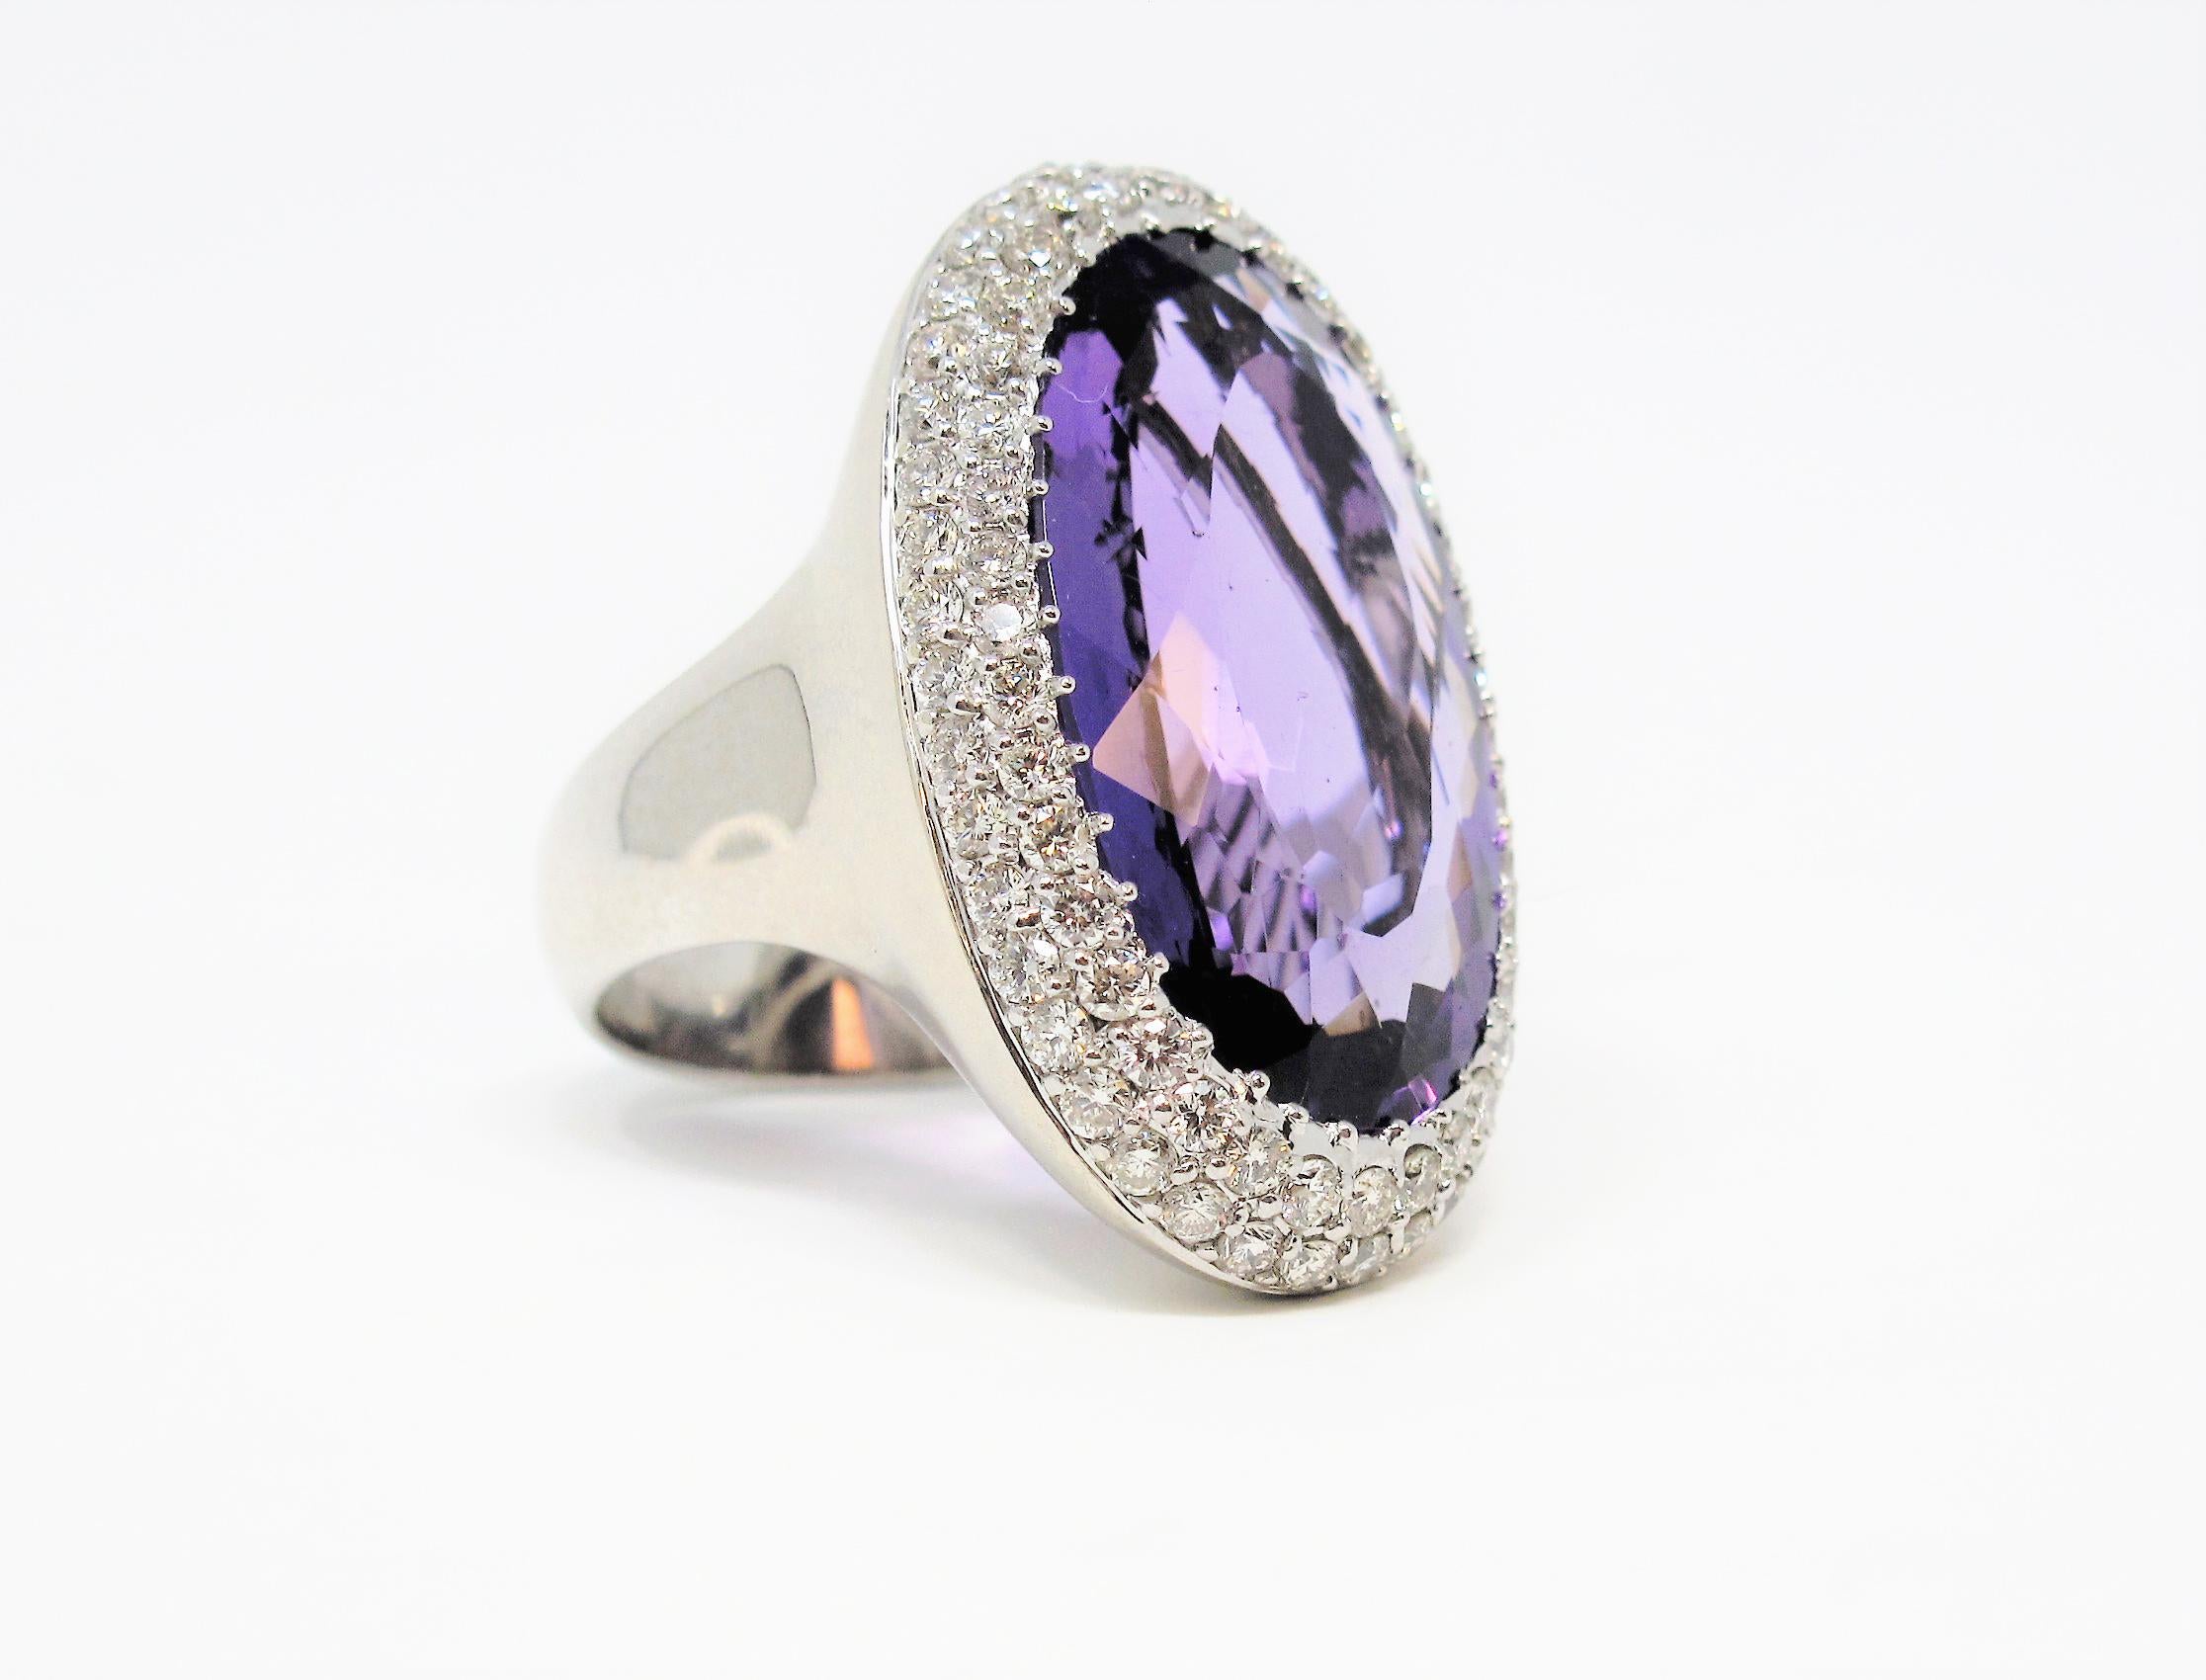 This incredible amethyst and double diamond halo cocktail ring will absolutely light up your finger. The stunning oversize amethyst stone sparkles spectacularly with its vibrant, crystal clear purple color. The double halo of icy white diamonds